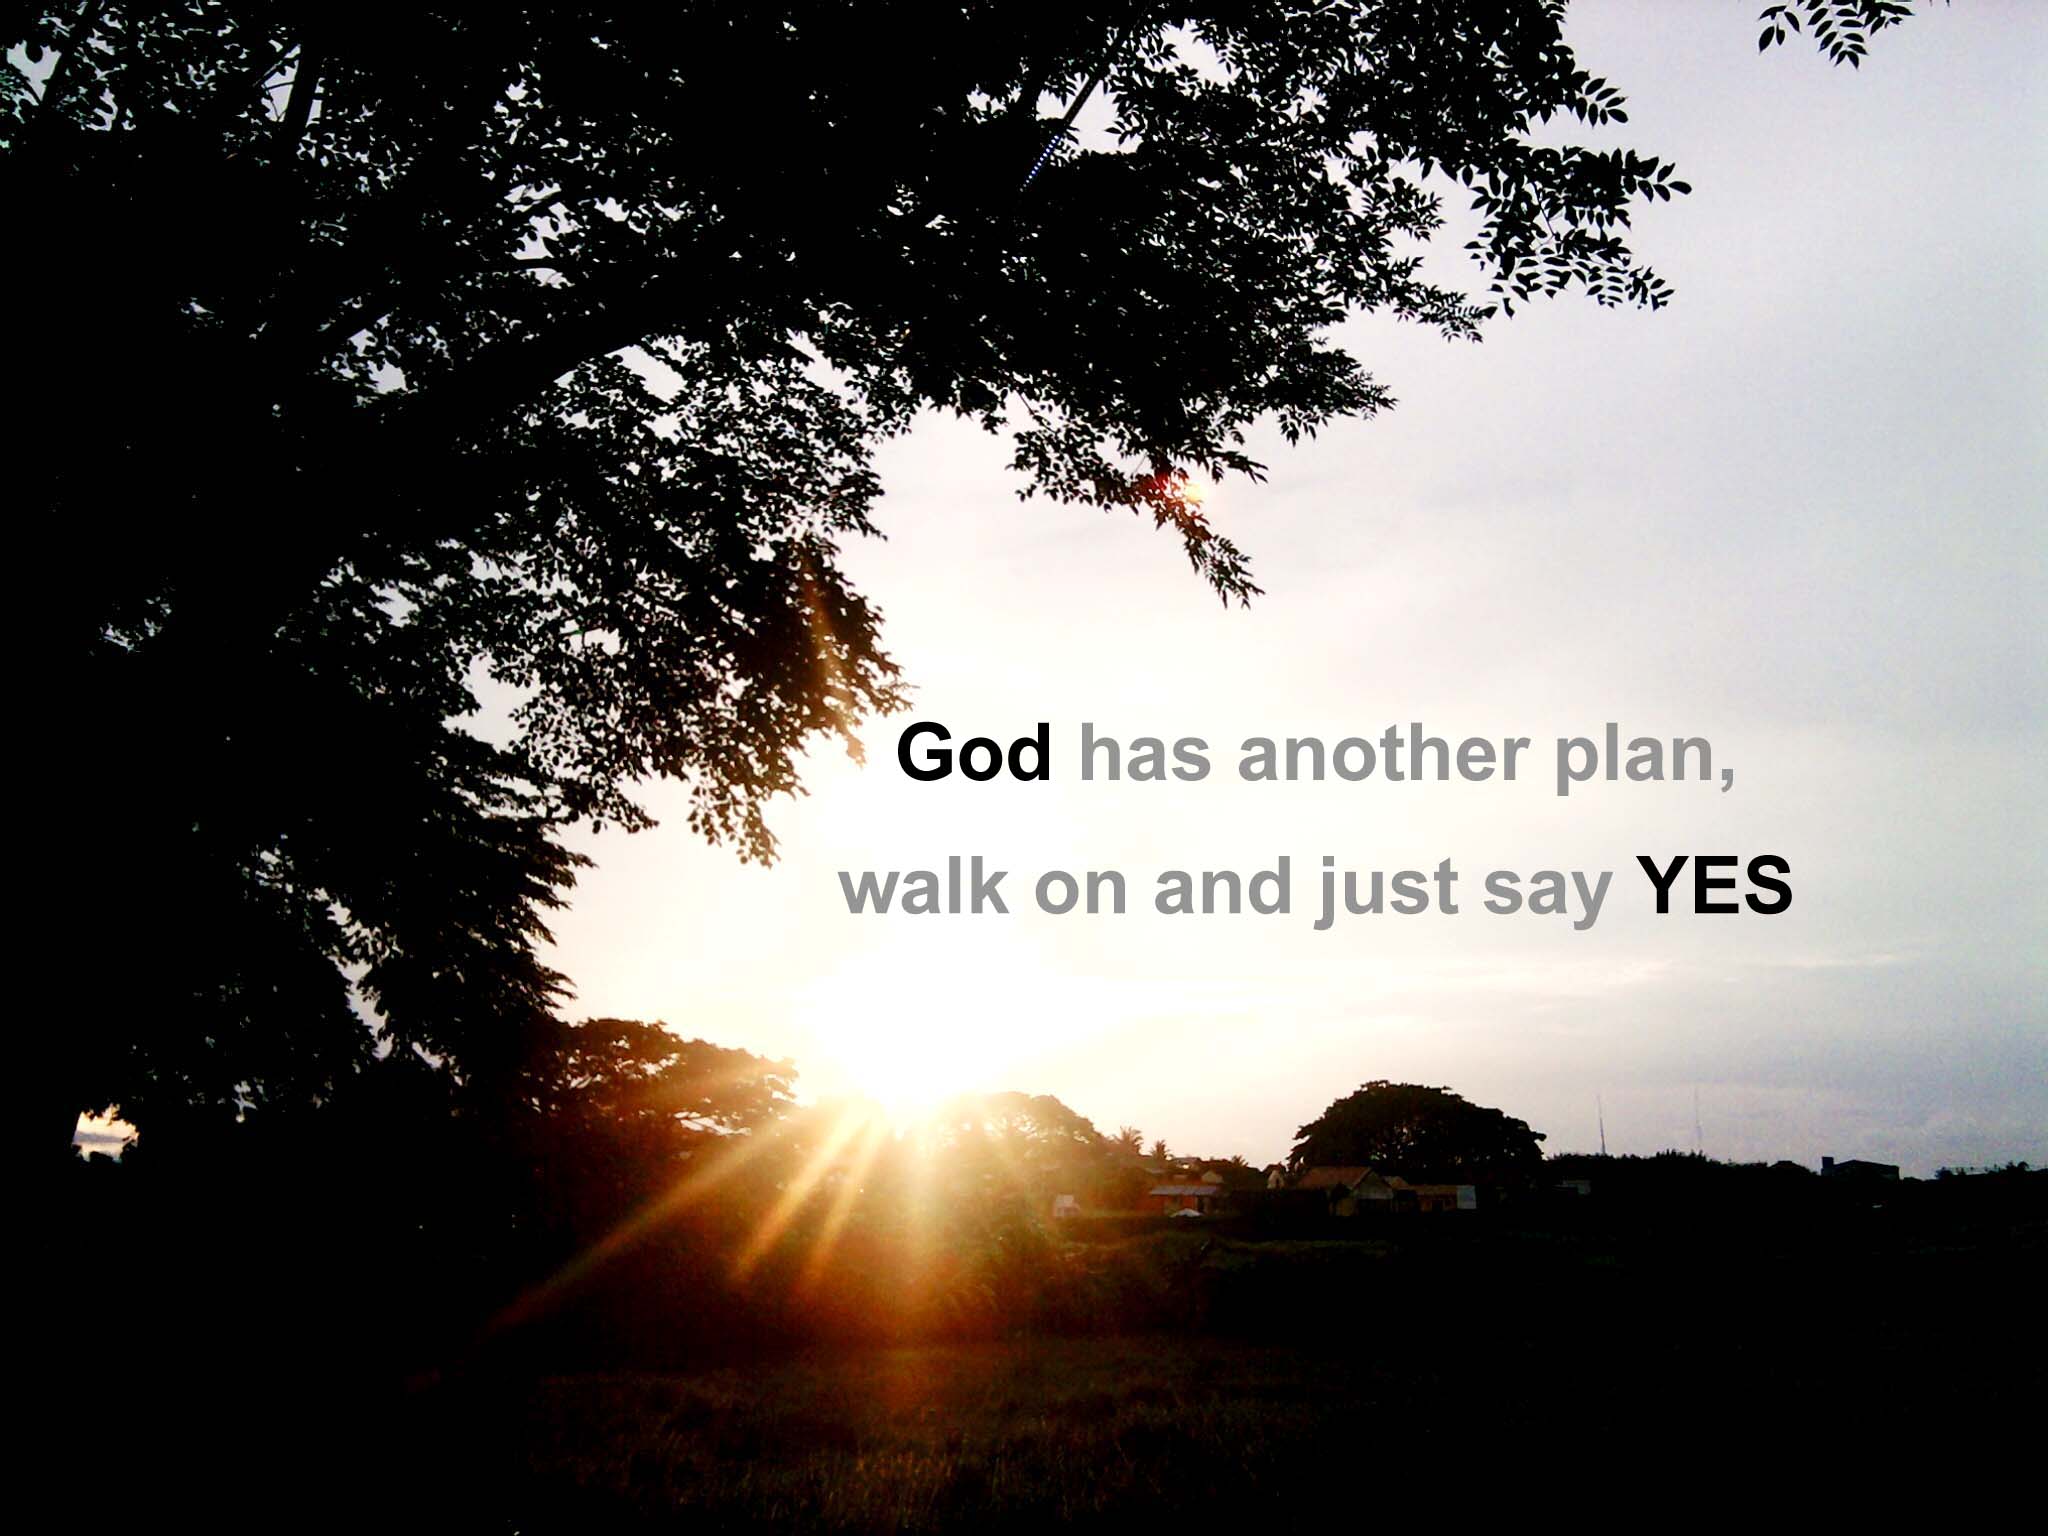 God had another plan, walk on and just say YES